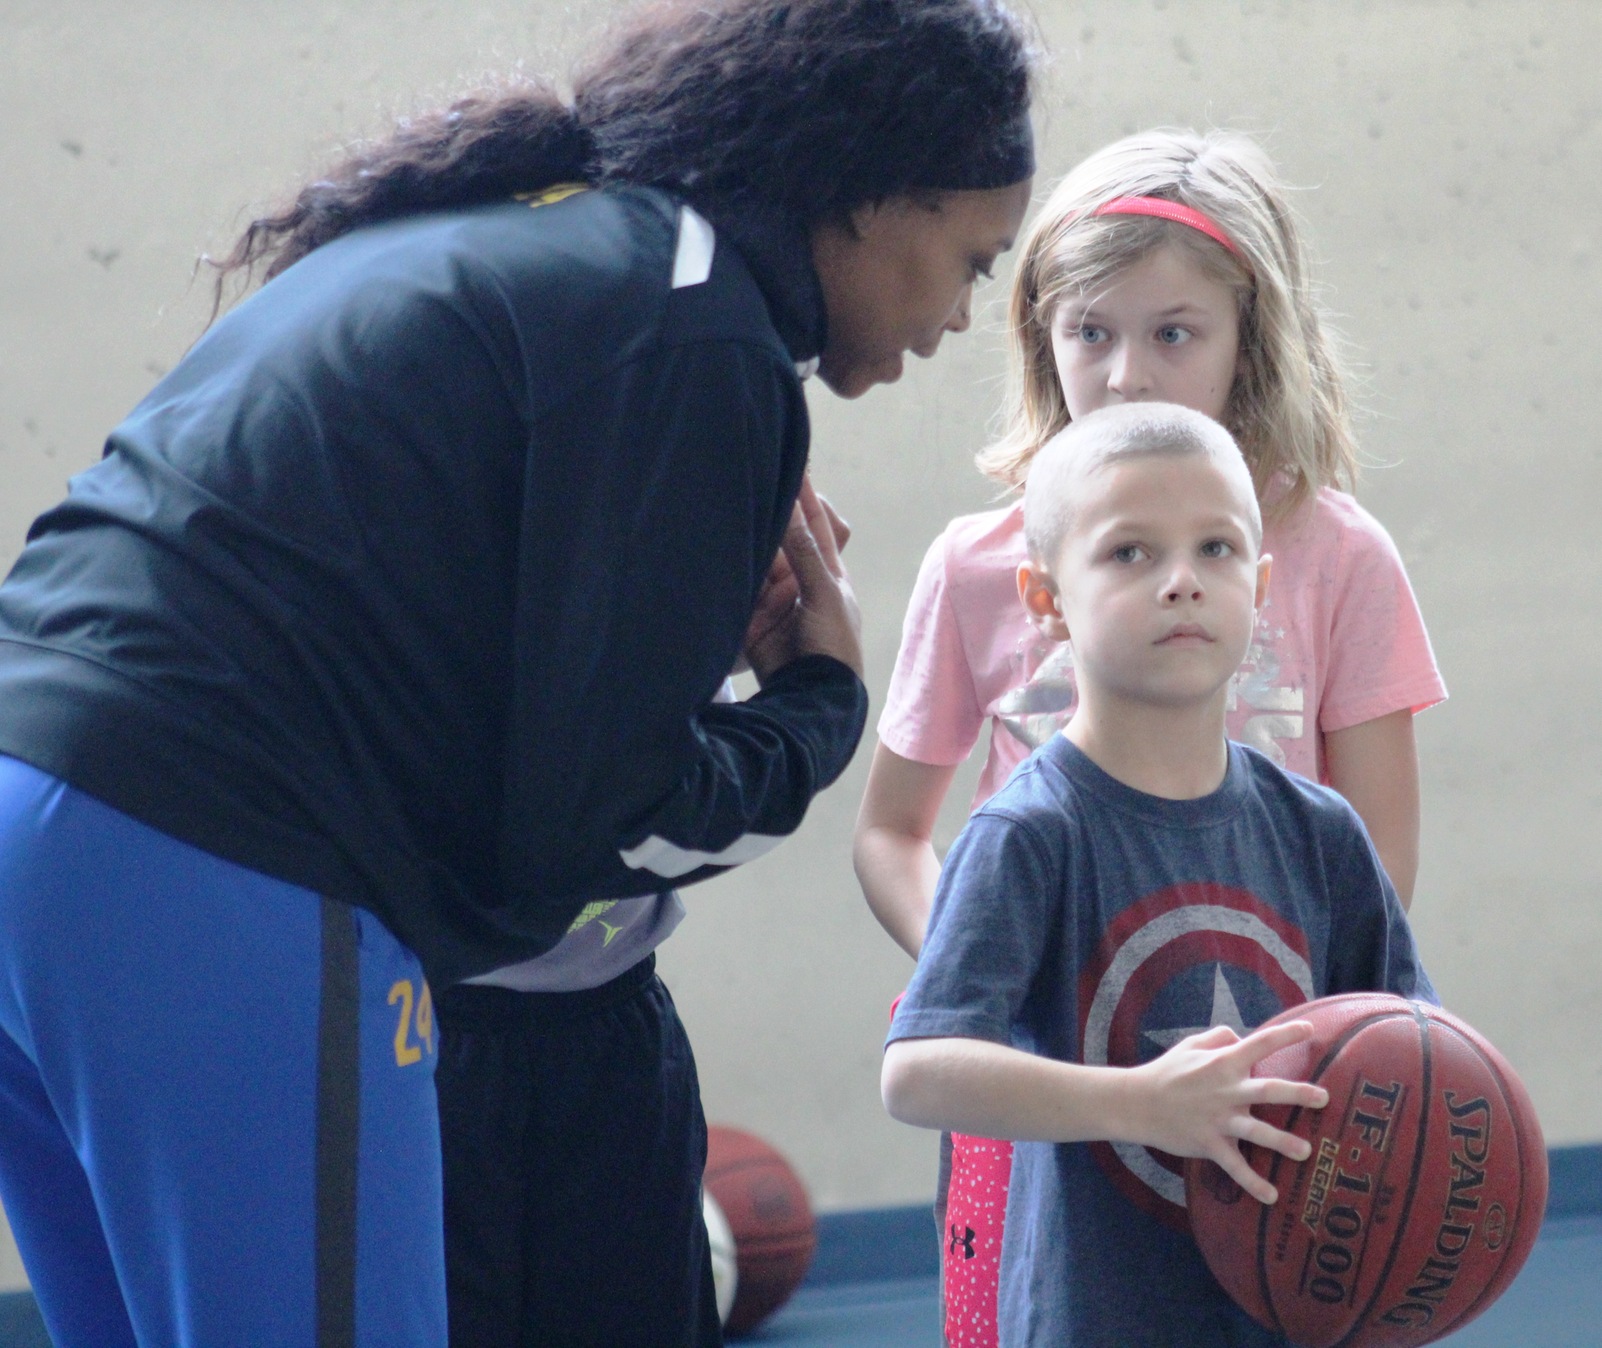 NIACC women's basketball player Khalilah Holloway helps at the skills clinic Sunday in the NIACC recreation center.